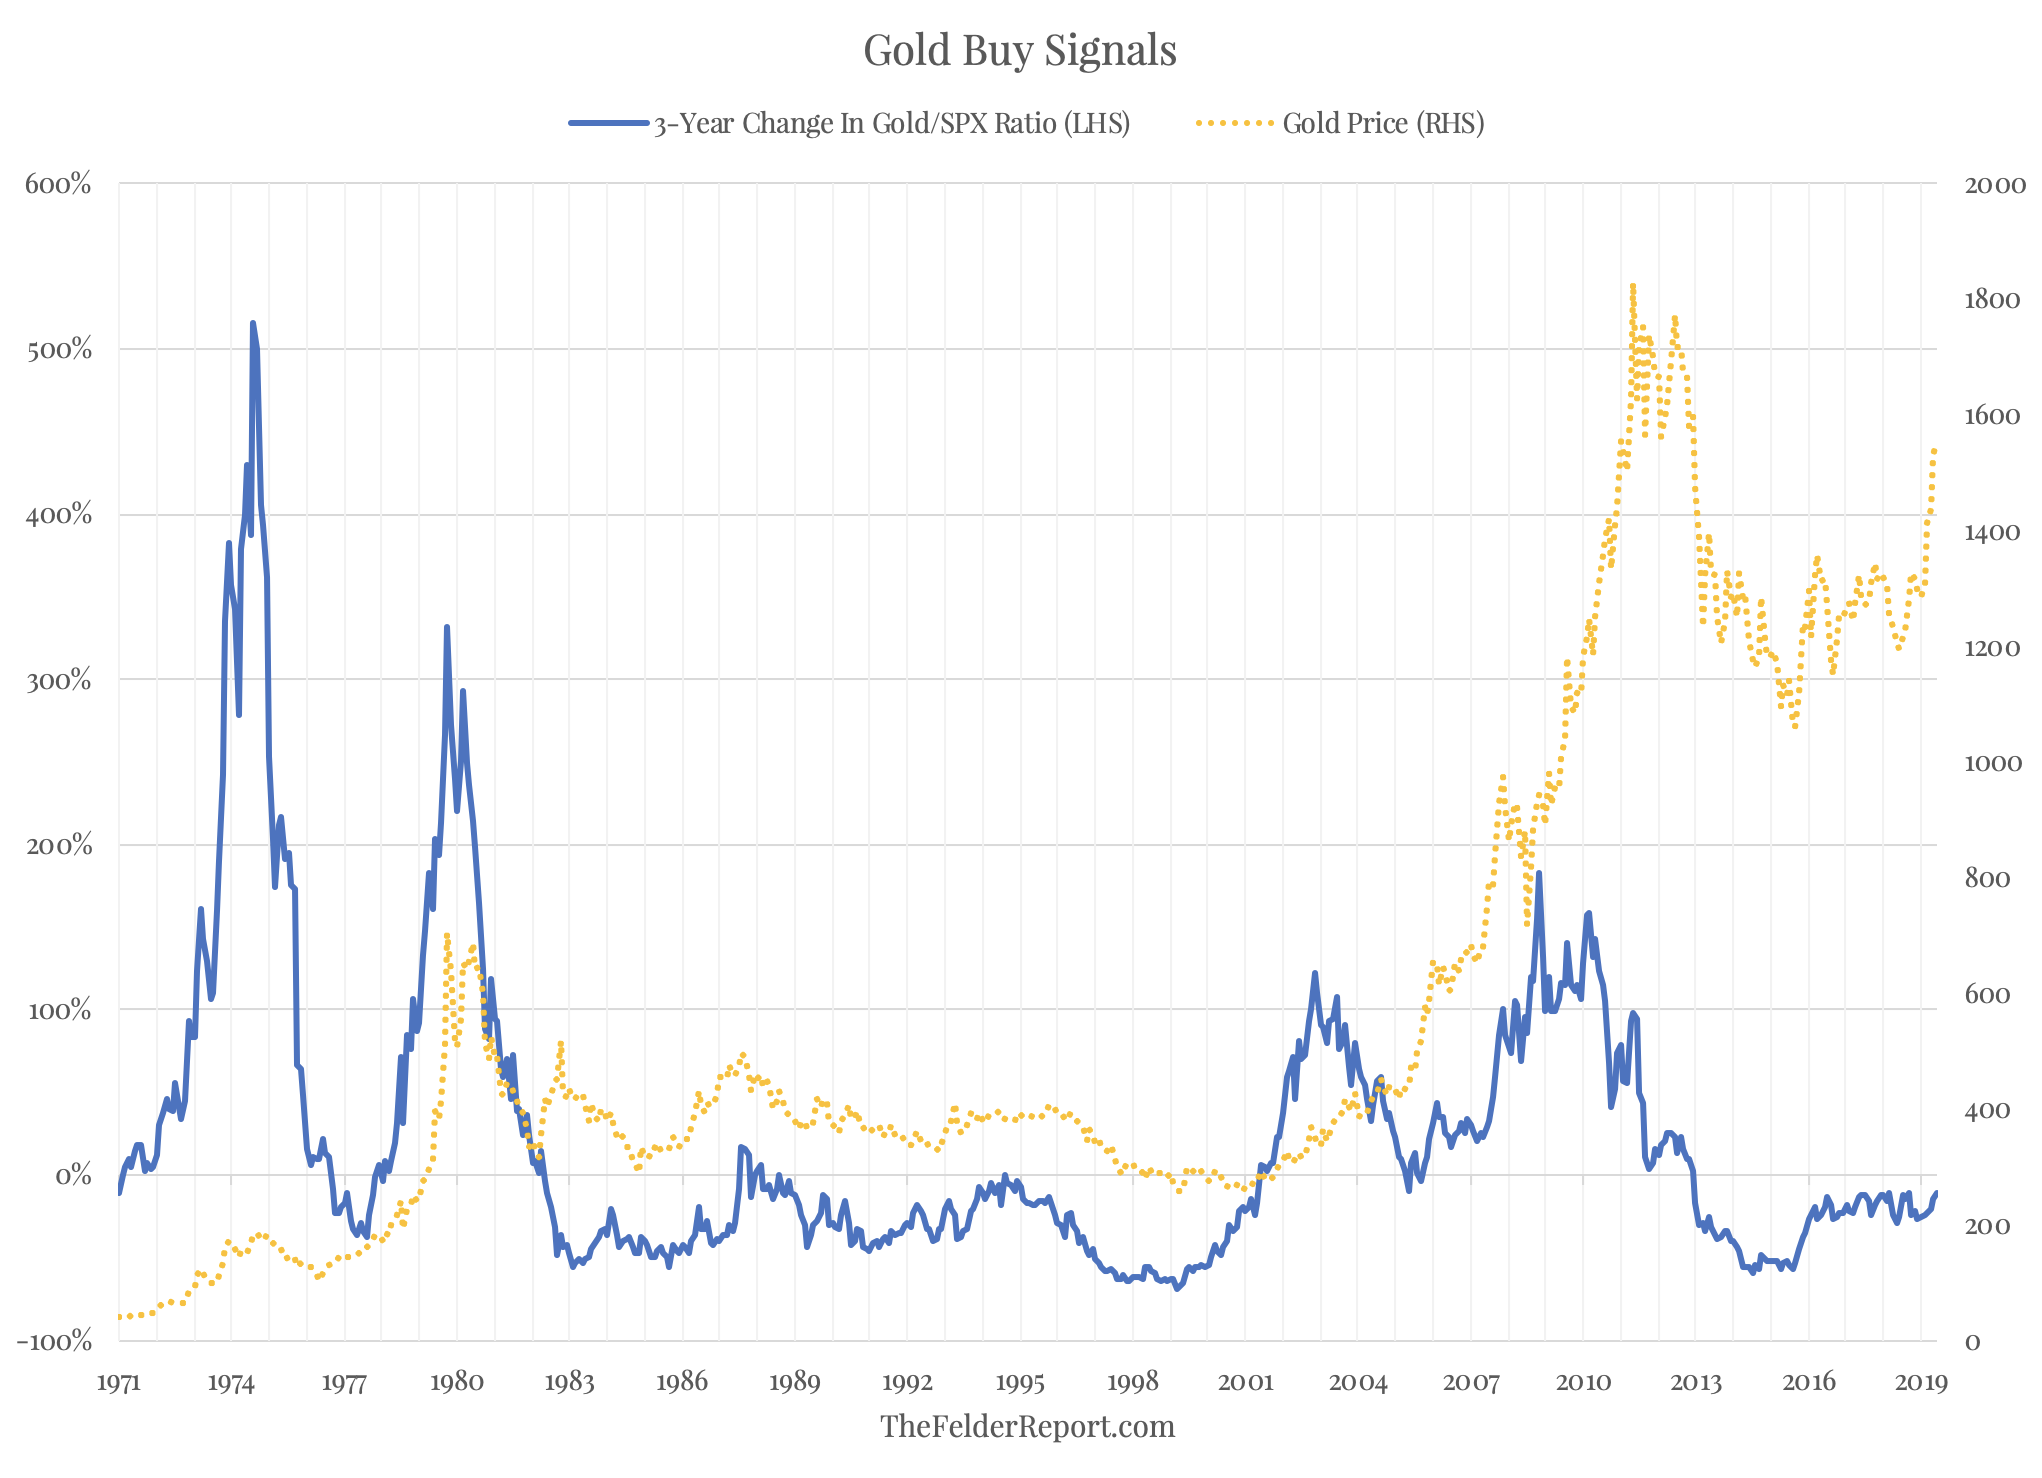 3 Year Change in Gold/SPX Ratio